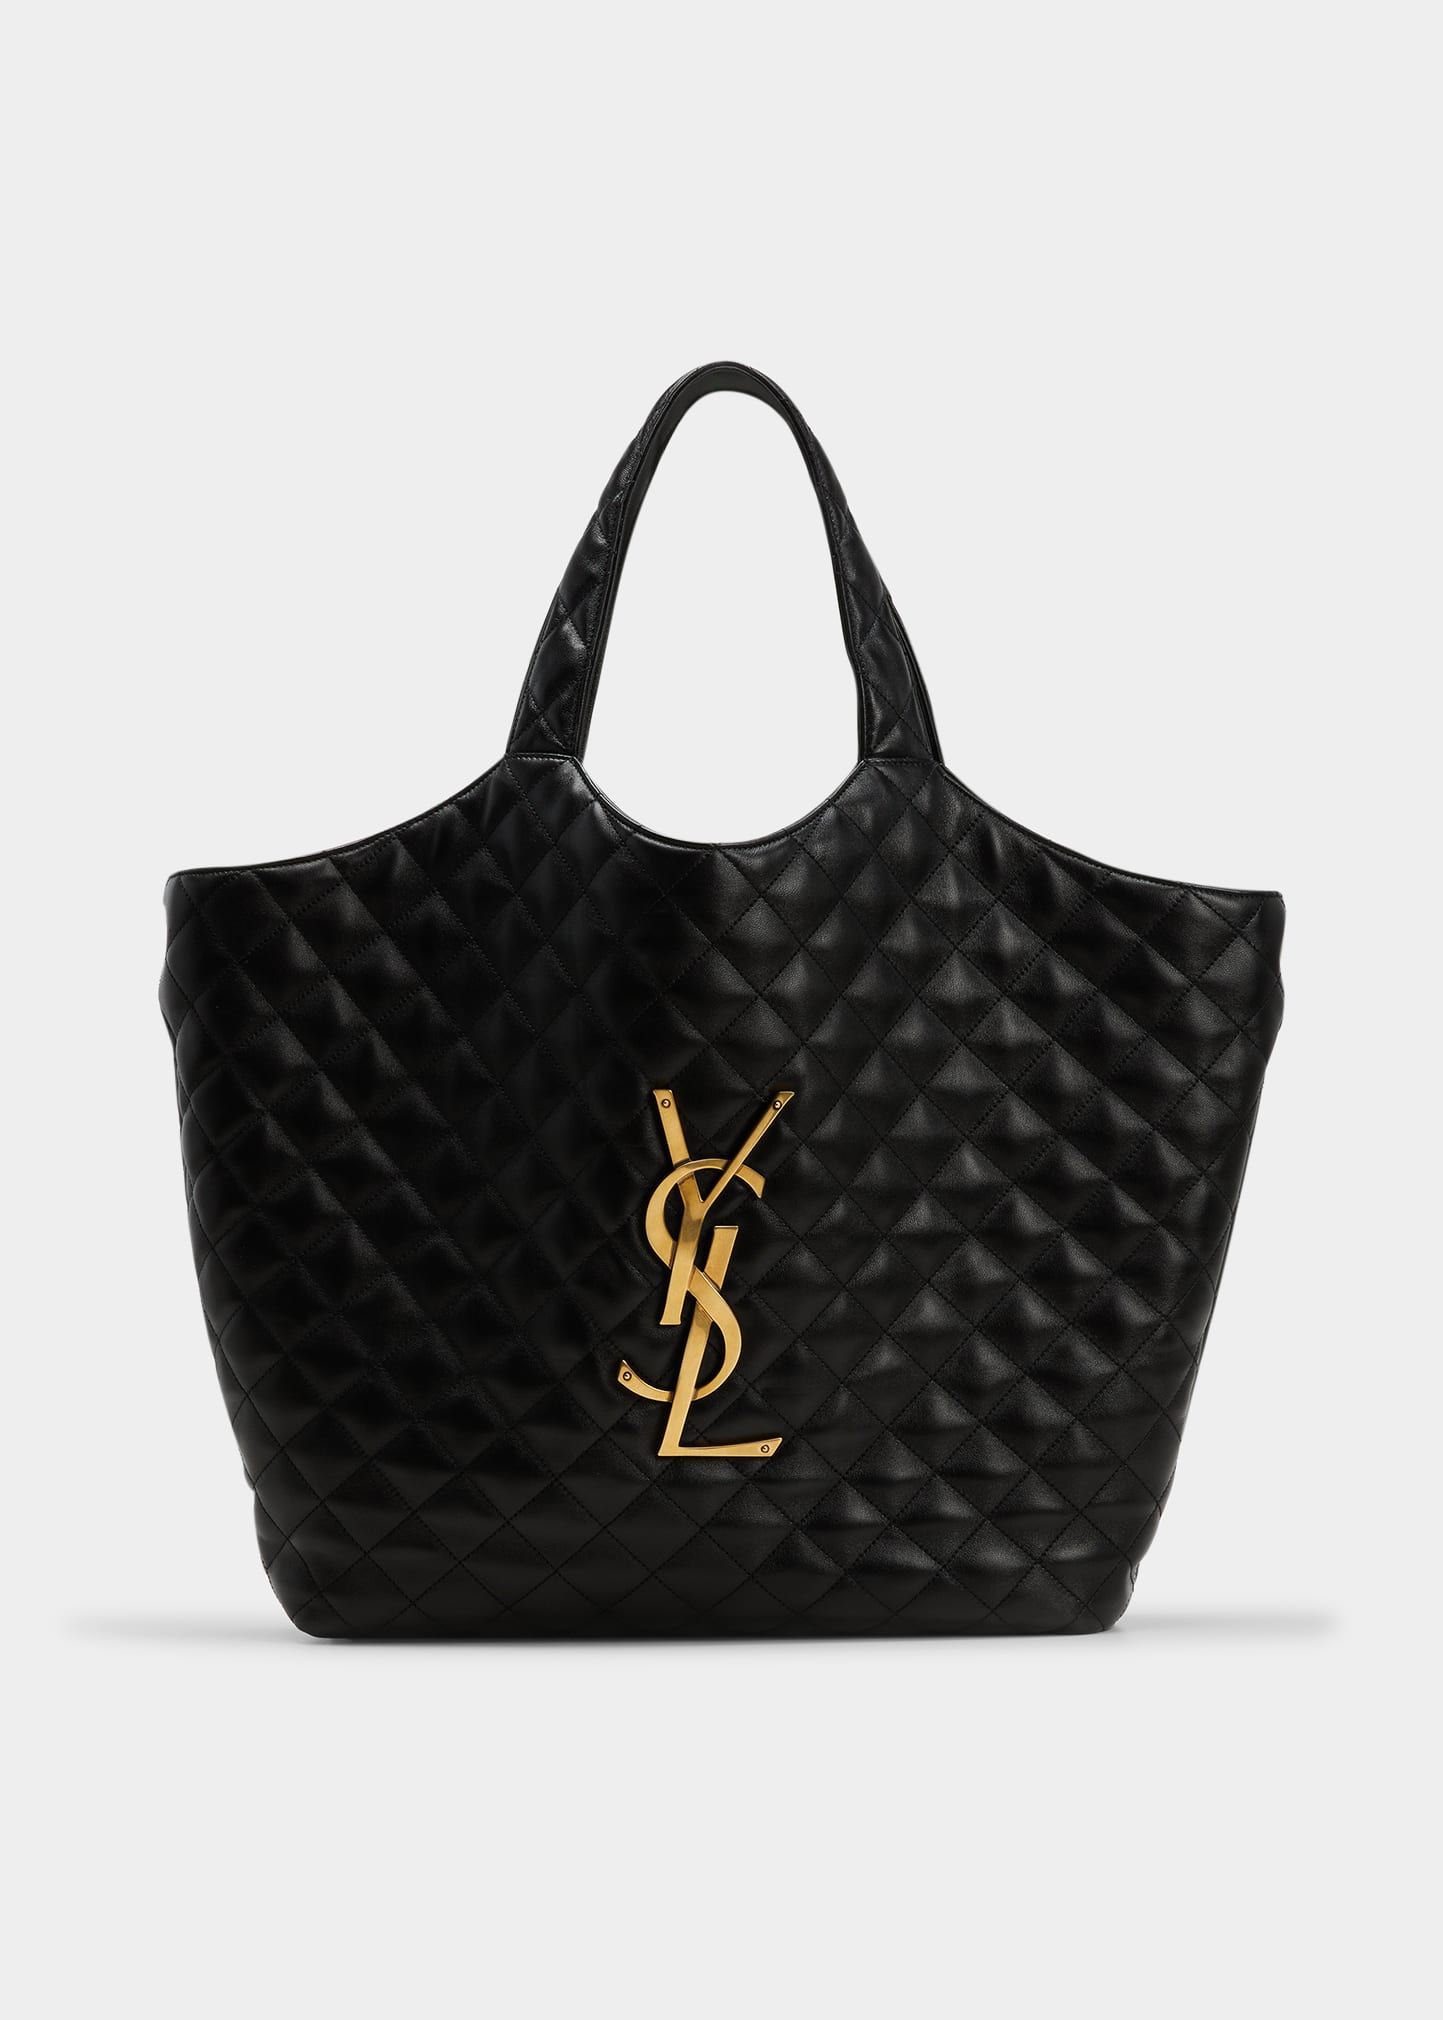 How Do You Authenticate and Care for an Yves Saint Laurent Handbag  The  Study